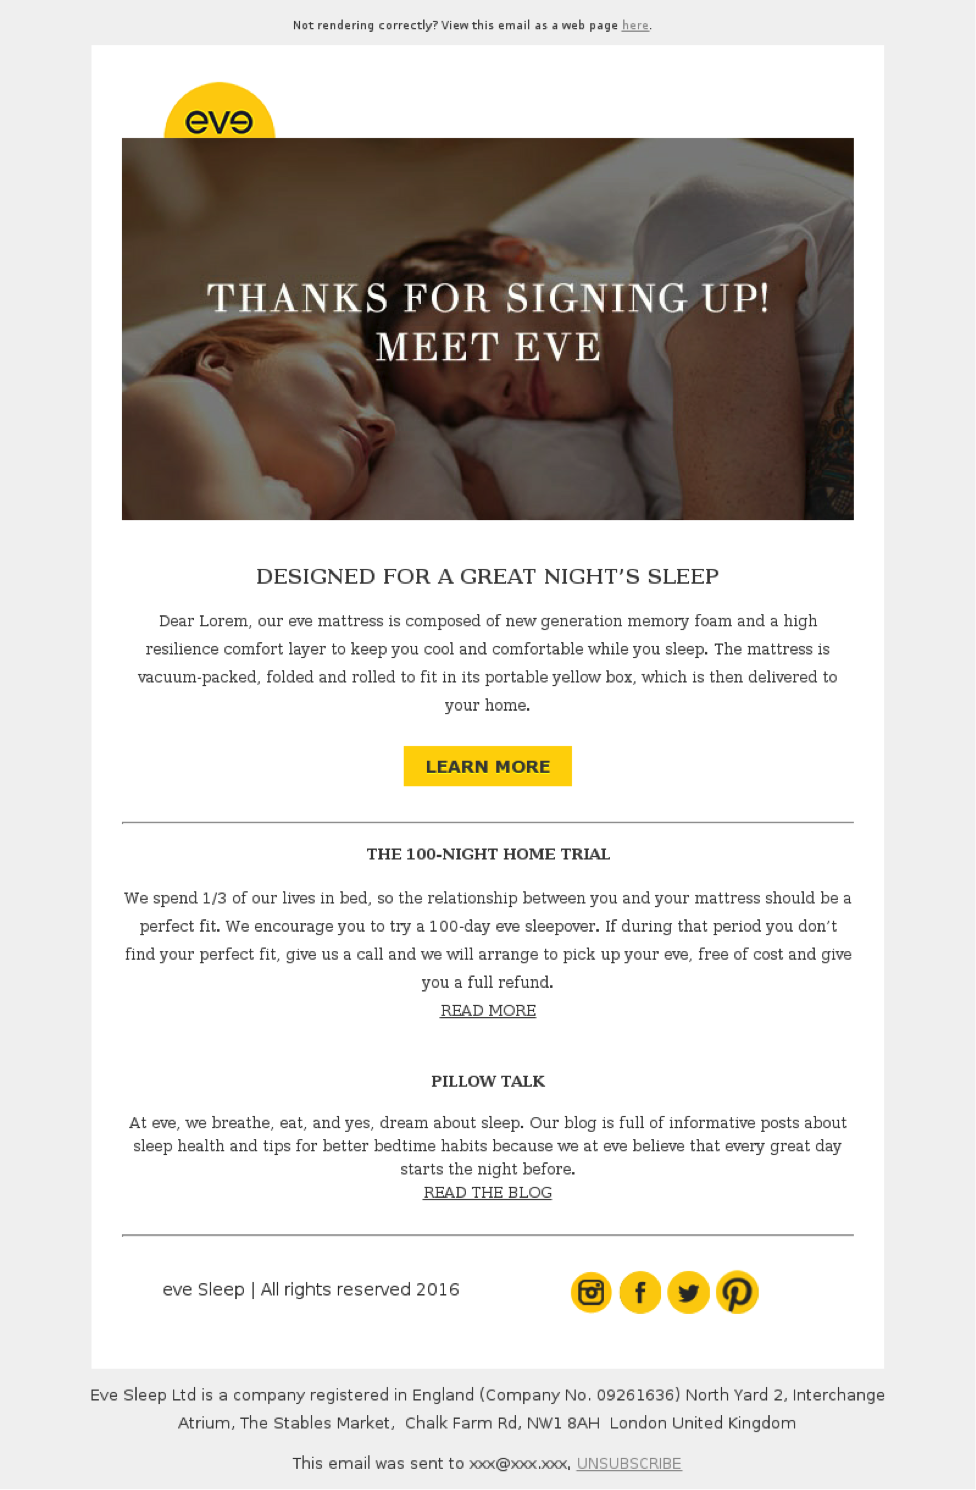 How to Plan & Execute Effective \'Welcome\' Emails